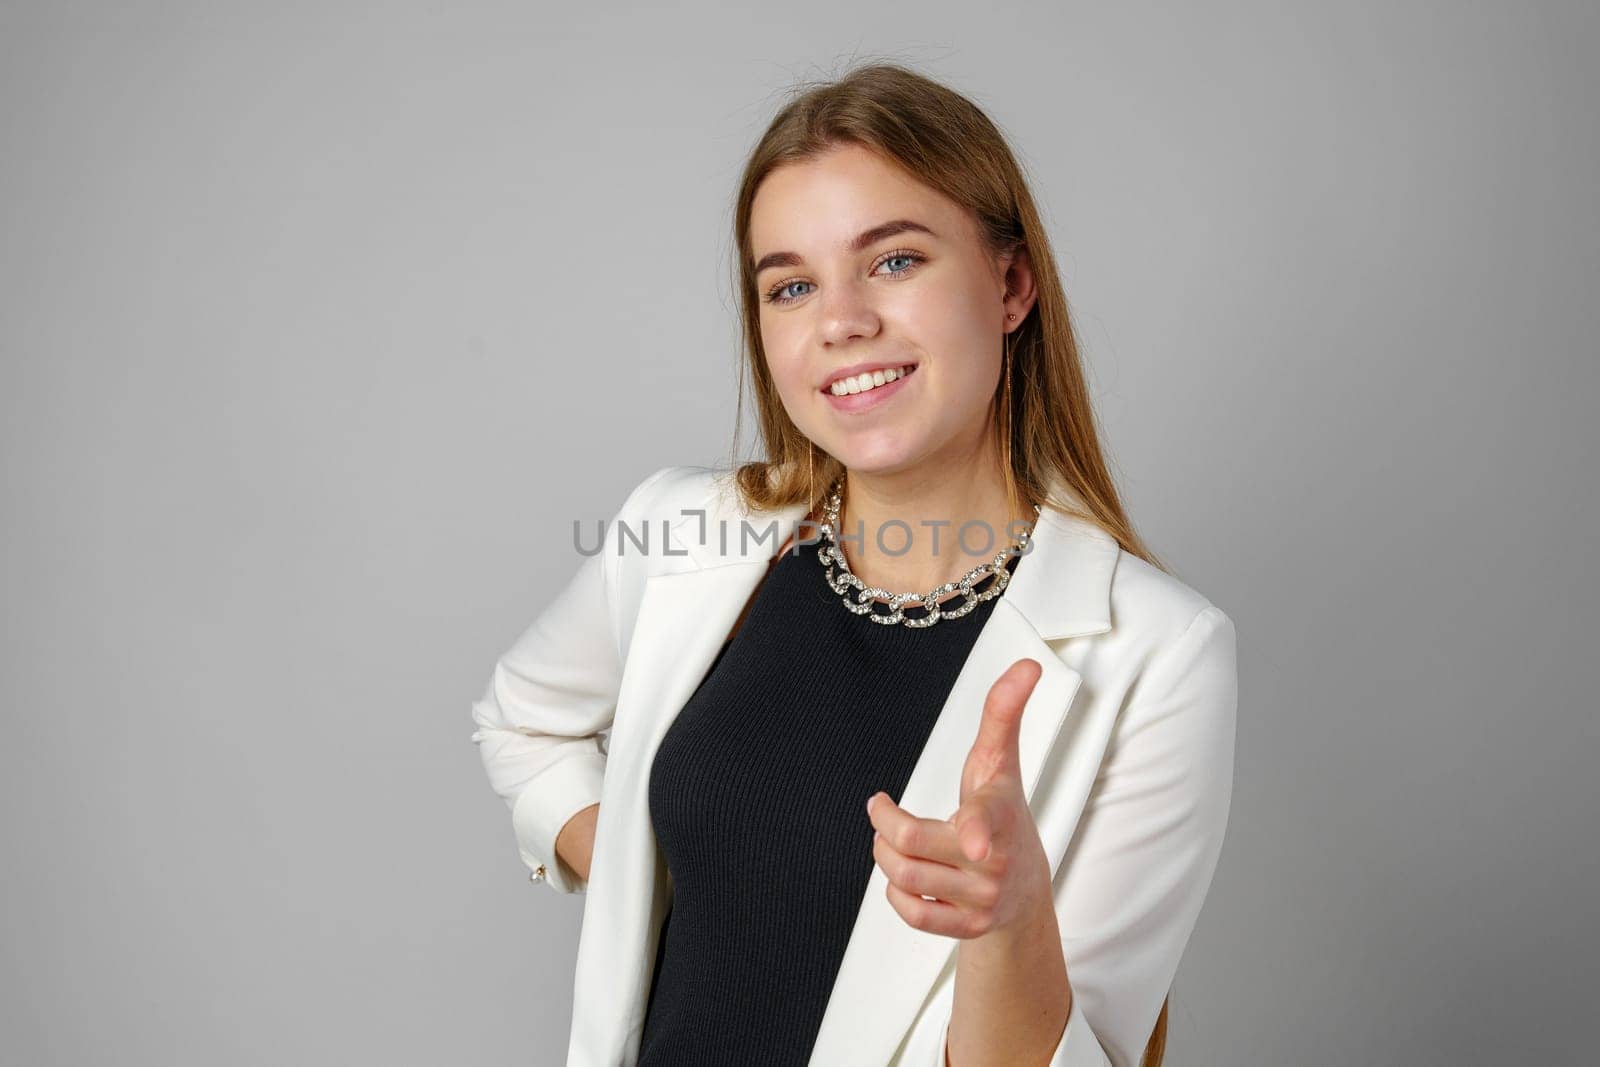 Young Woman in White Blazer Pointing at You Against a Grey Background in Studio